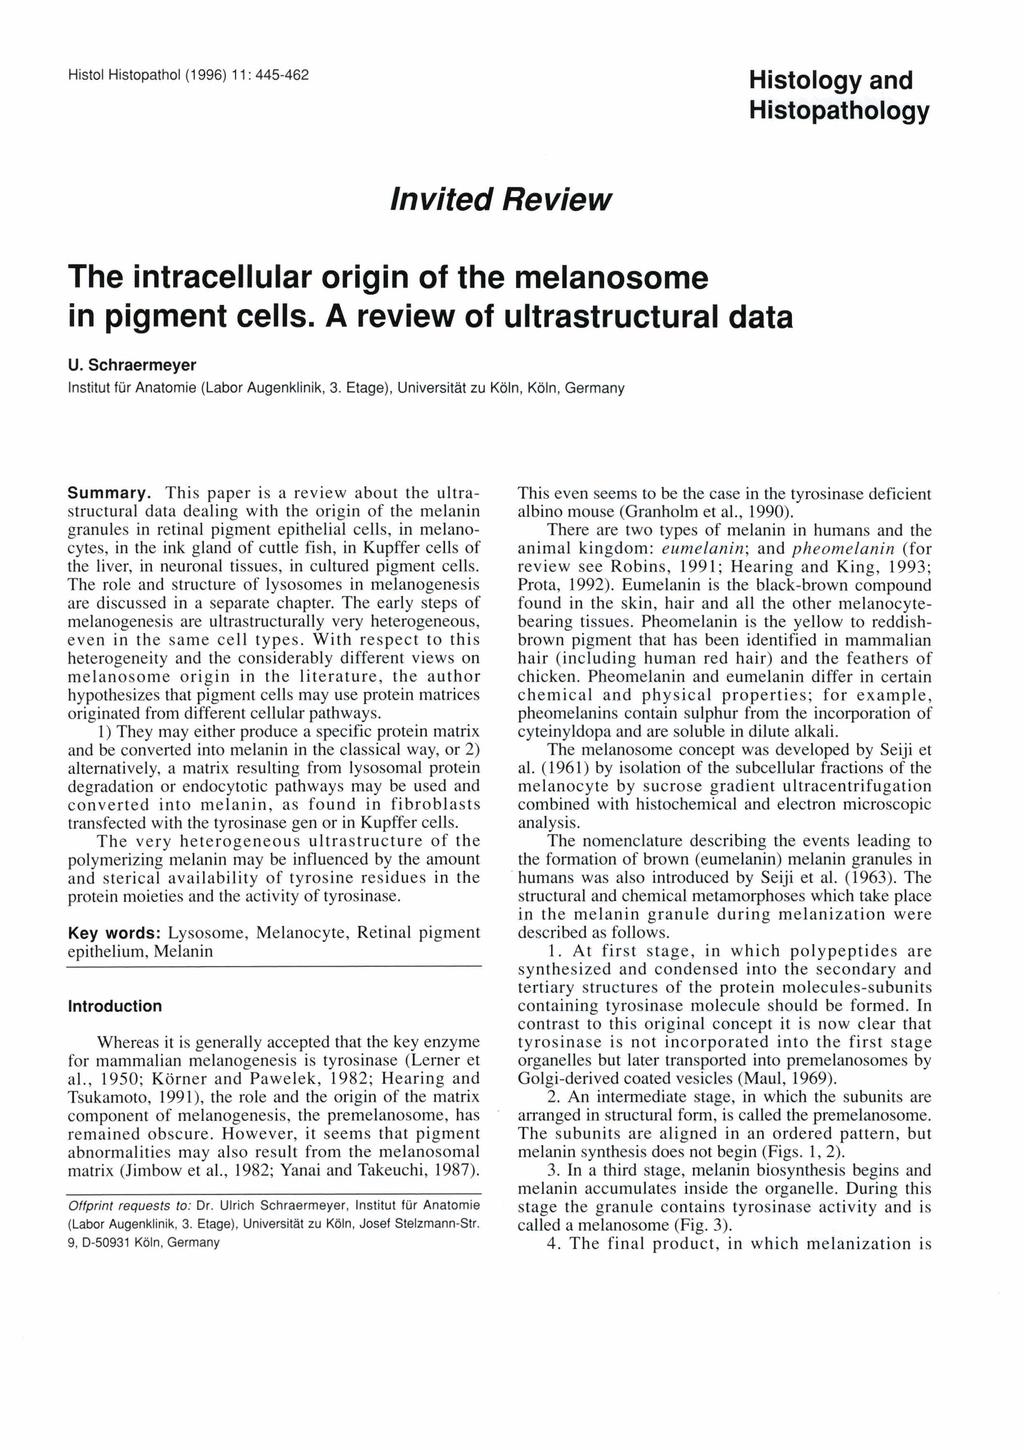 Histol Histopathol (1 996) 1 1 : 445-462 Histology and Histopathology ln vited Re vie w The intracellular origin of the melanosome in pigment cells. A review of ultrastructural data U.